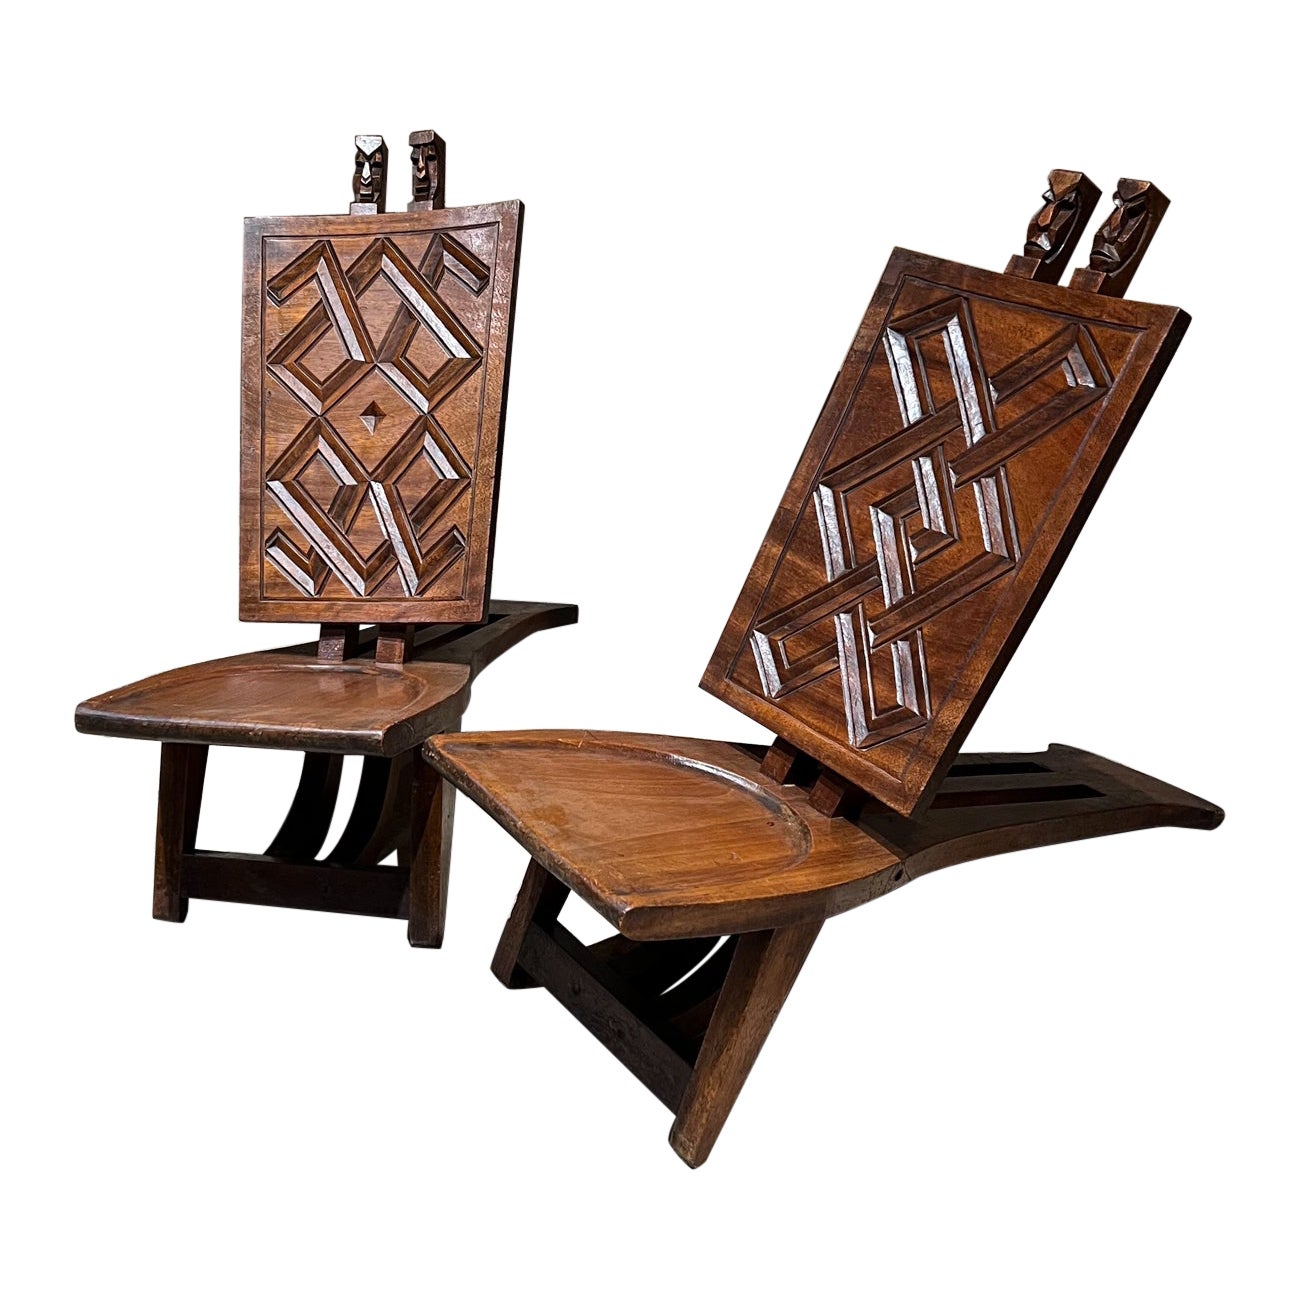 1960s Modern Africa Pair of Low Tribal Chief Chairs in Geometric Wood